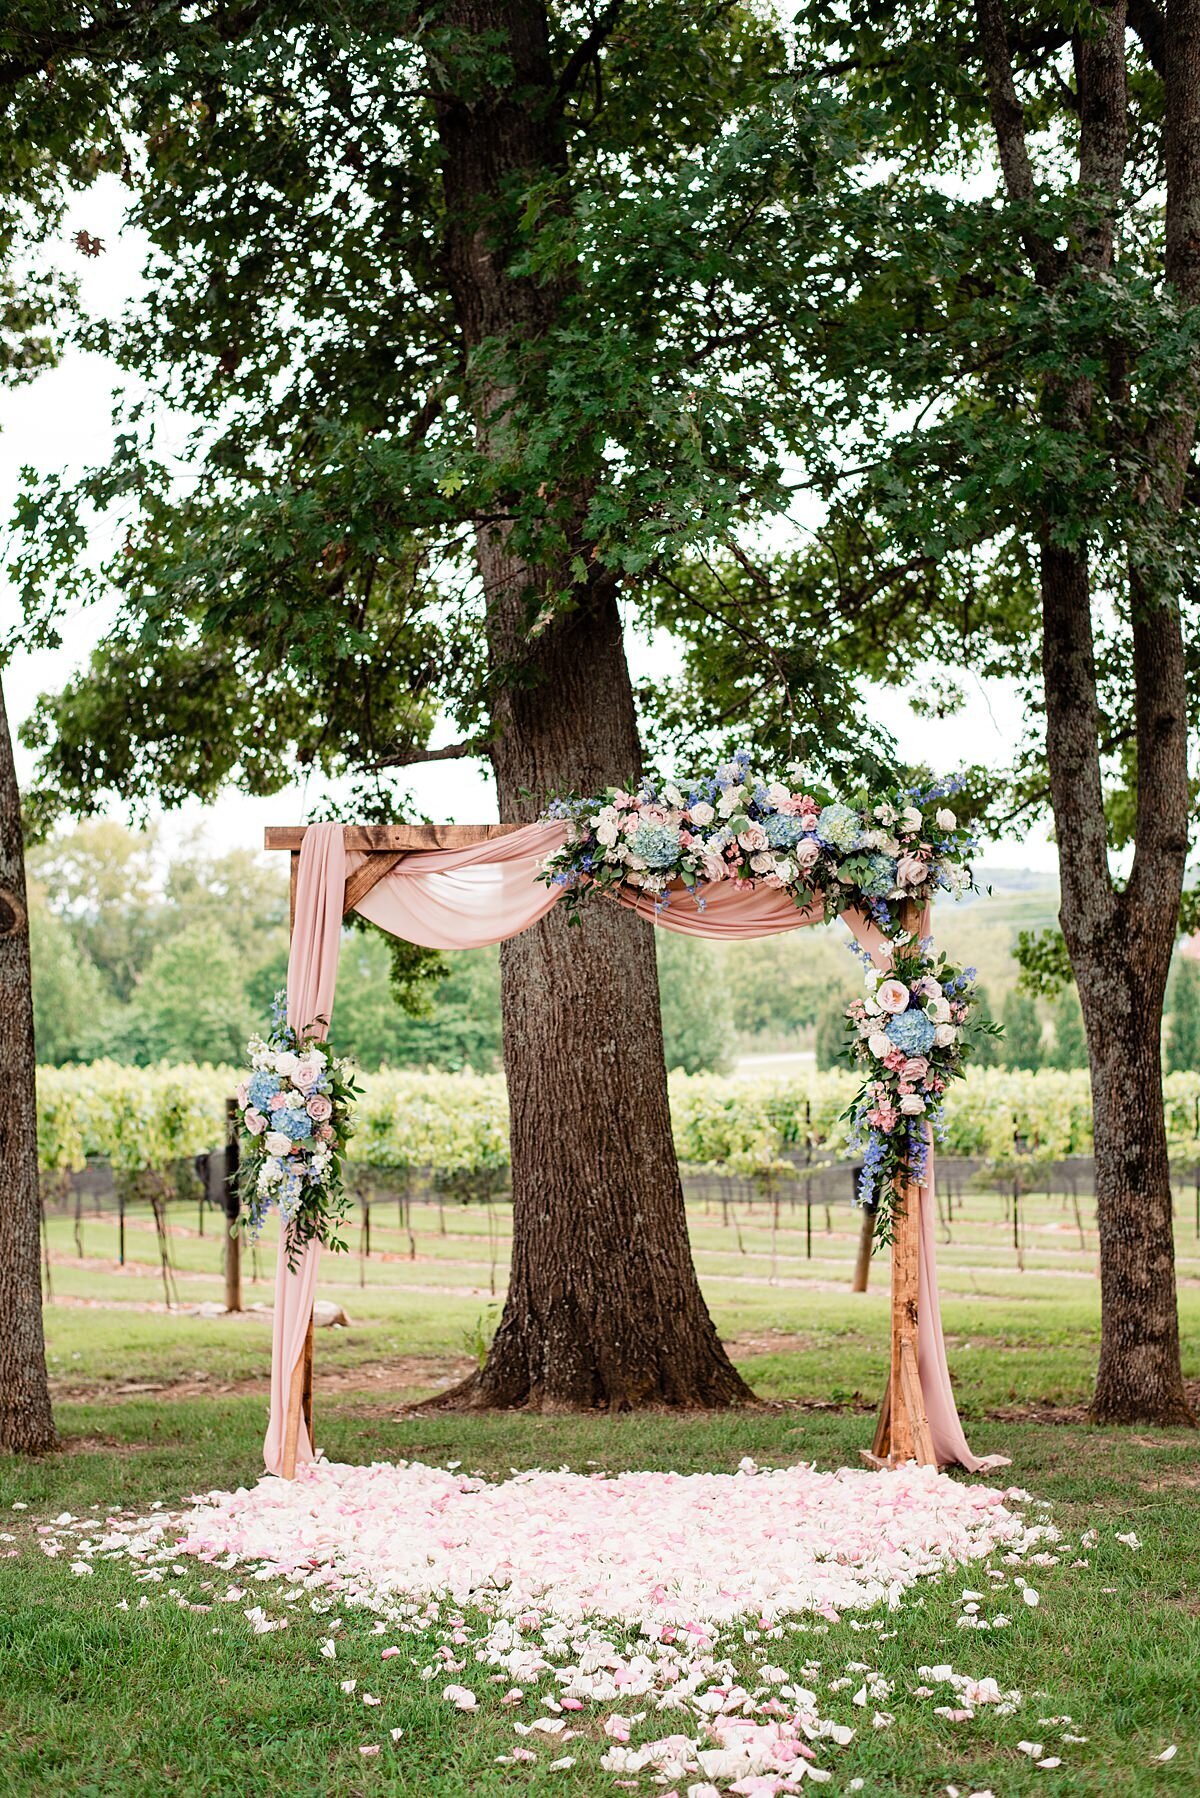 A wood wedding arbor, draped in blush pink sheer fabric decorated with three large floral sprays of white roses, blue hydrangea, and blush roses. The ground in front of the arbor is covered with white and blush rose petals. Behind the arbor are rows of grape vines at Arrington Vineyard.